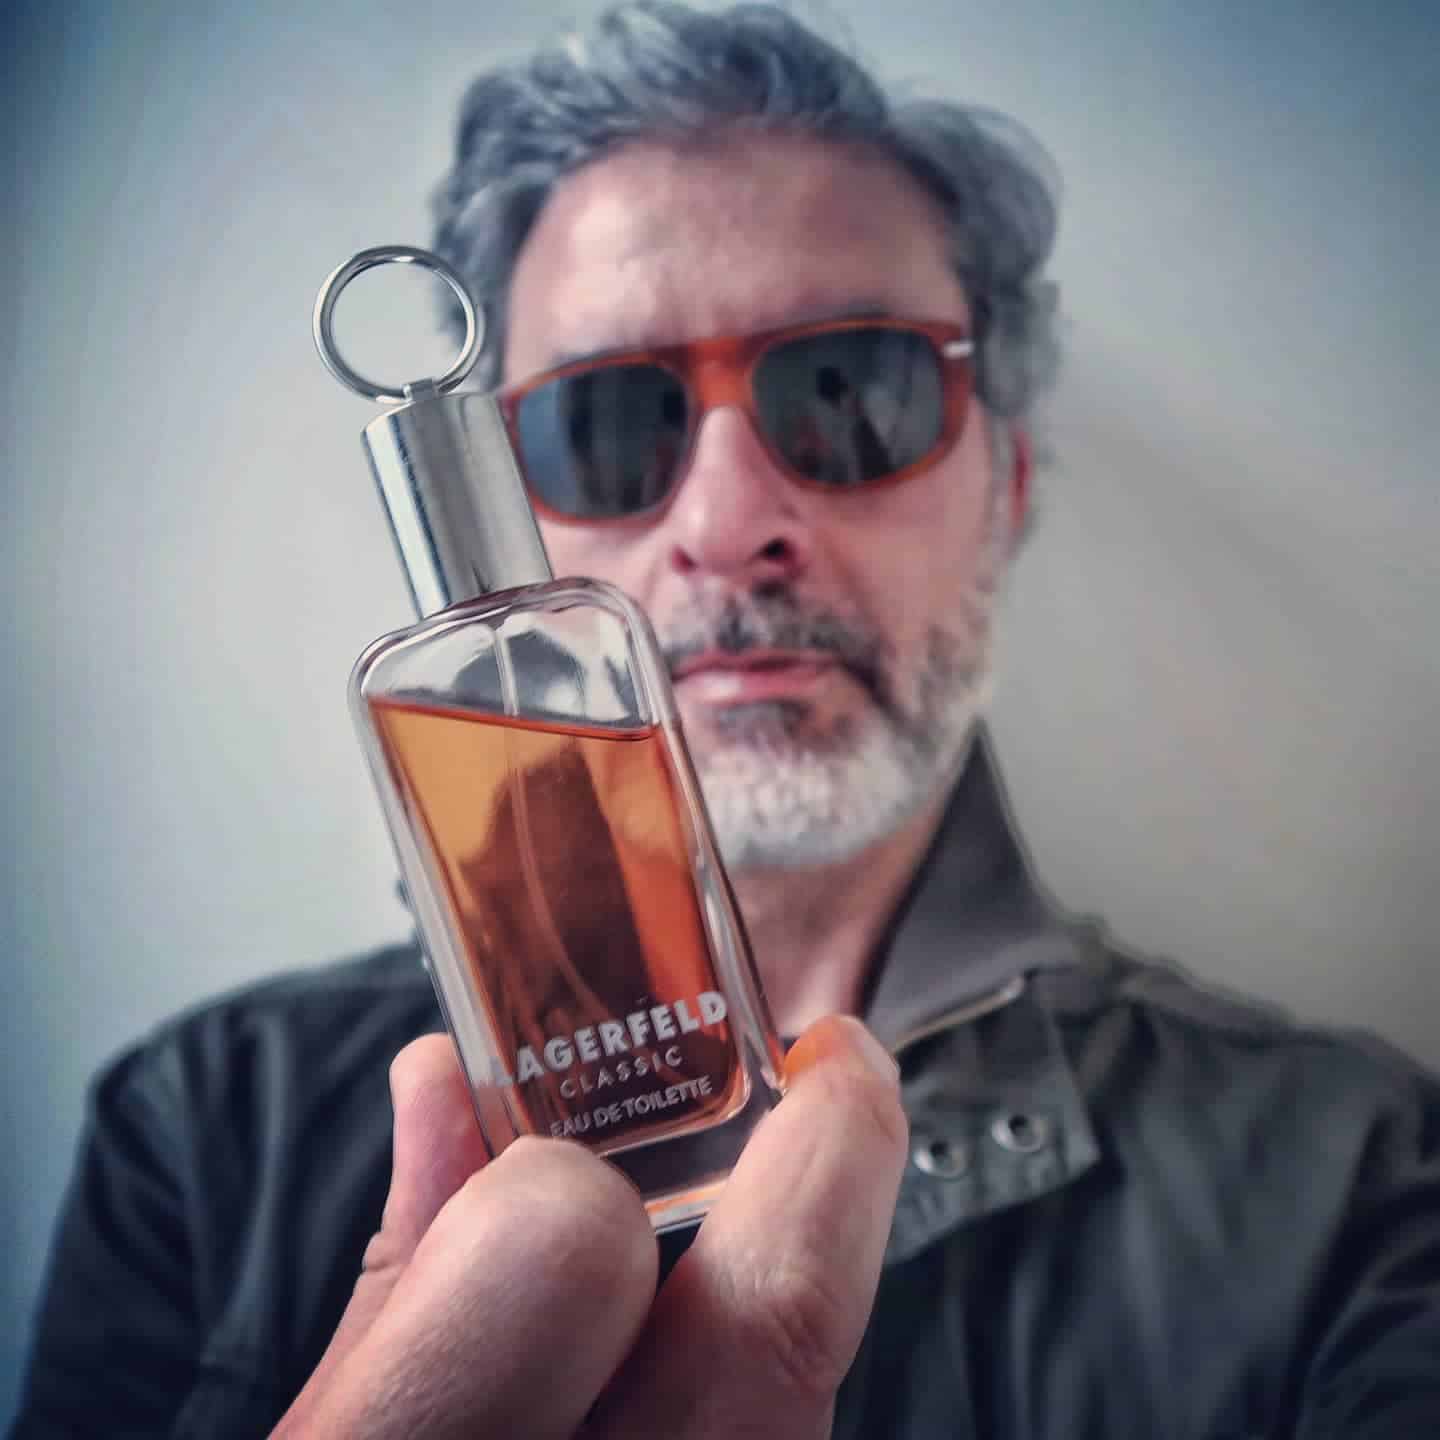 man holding a small bottle of lagerfeld classic cologne